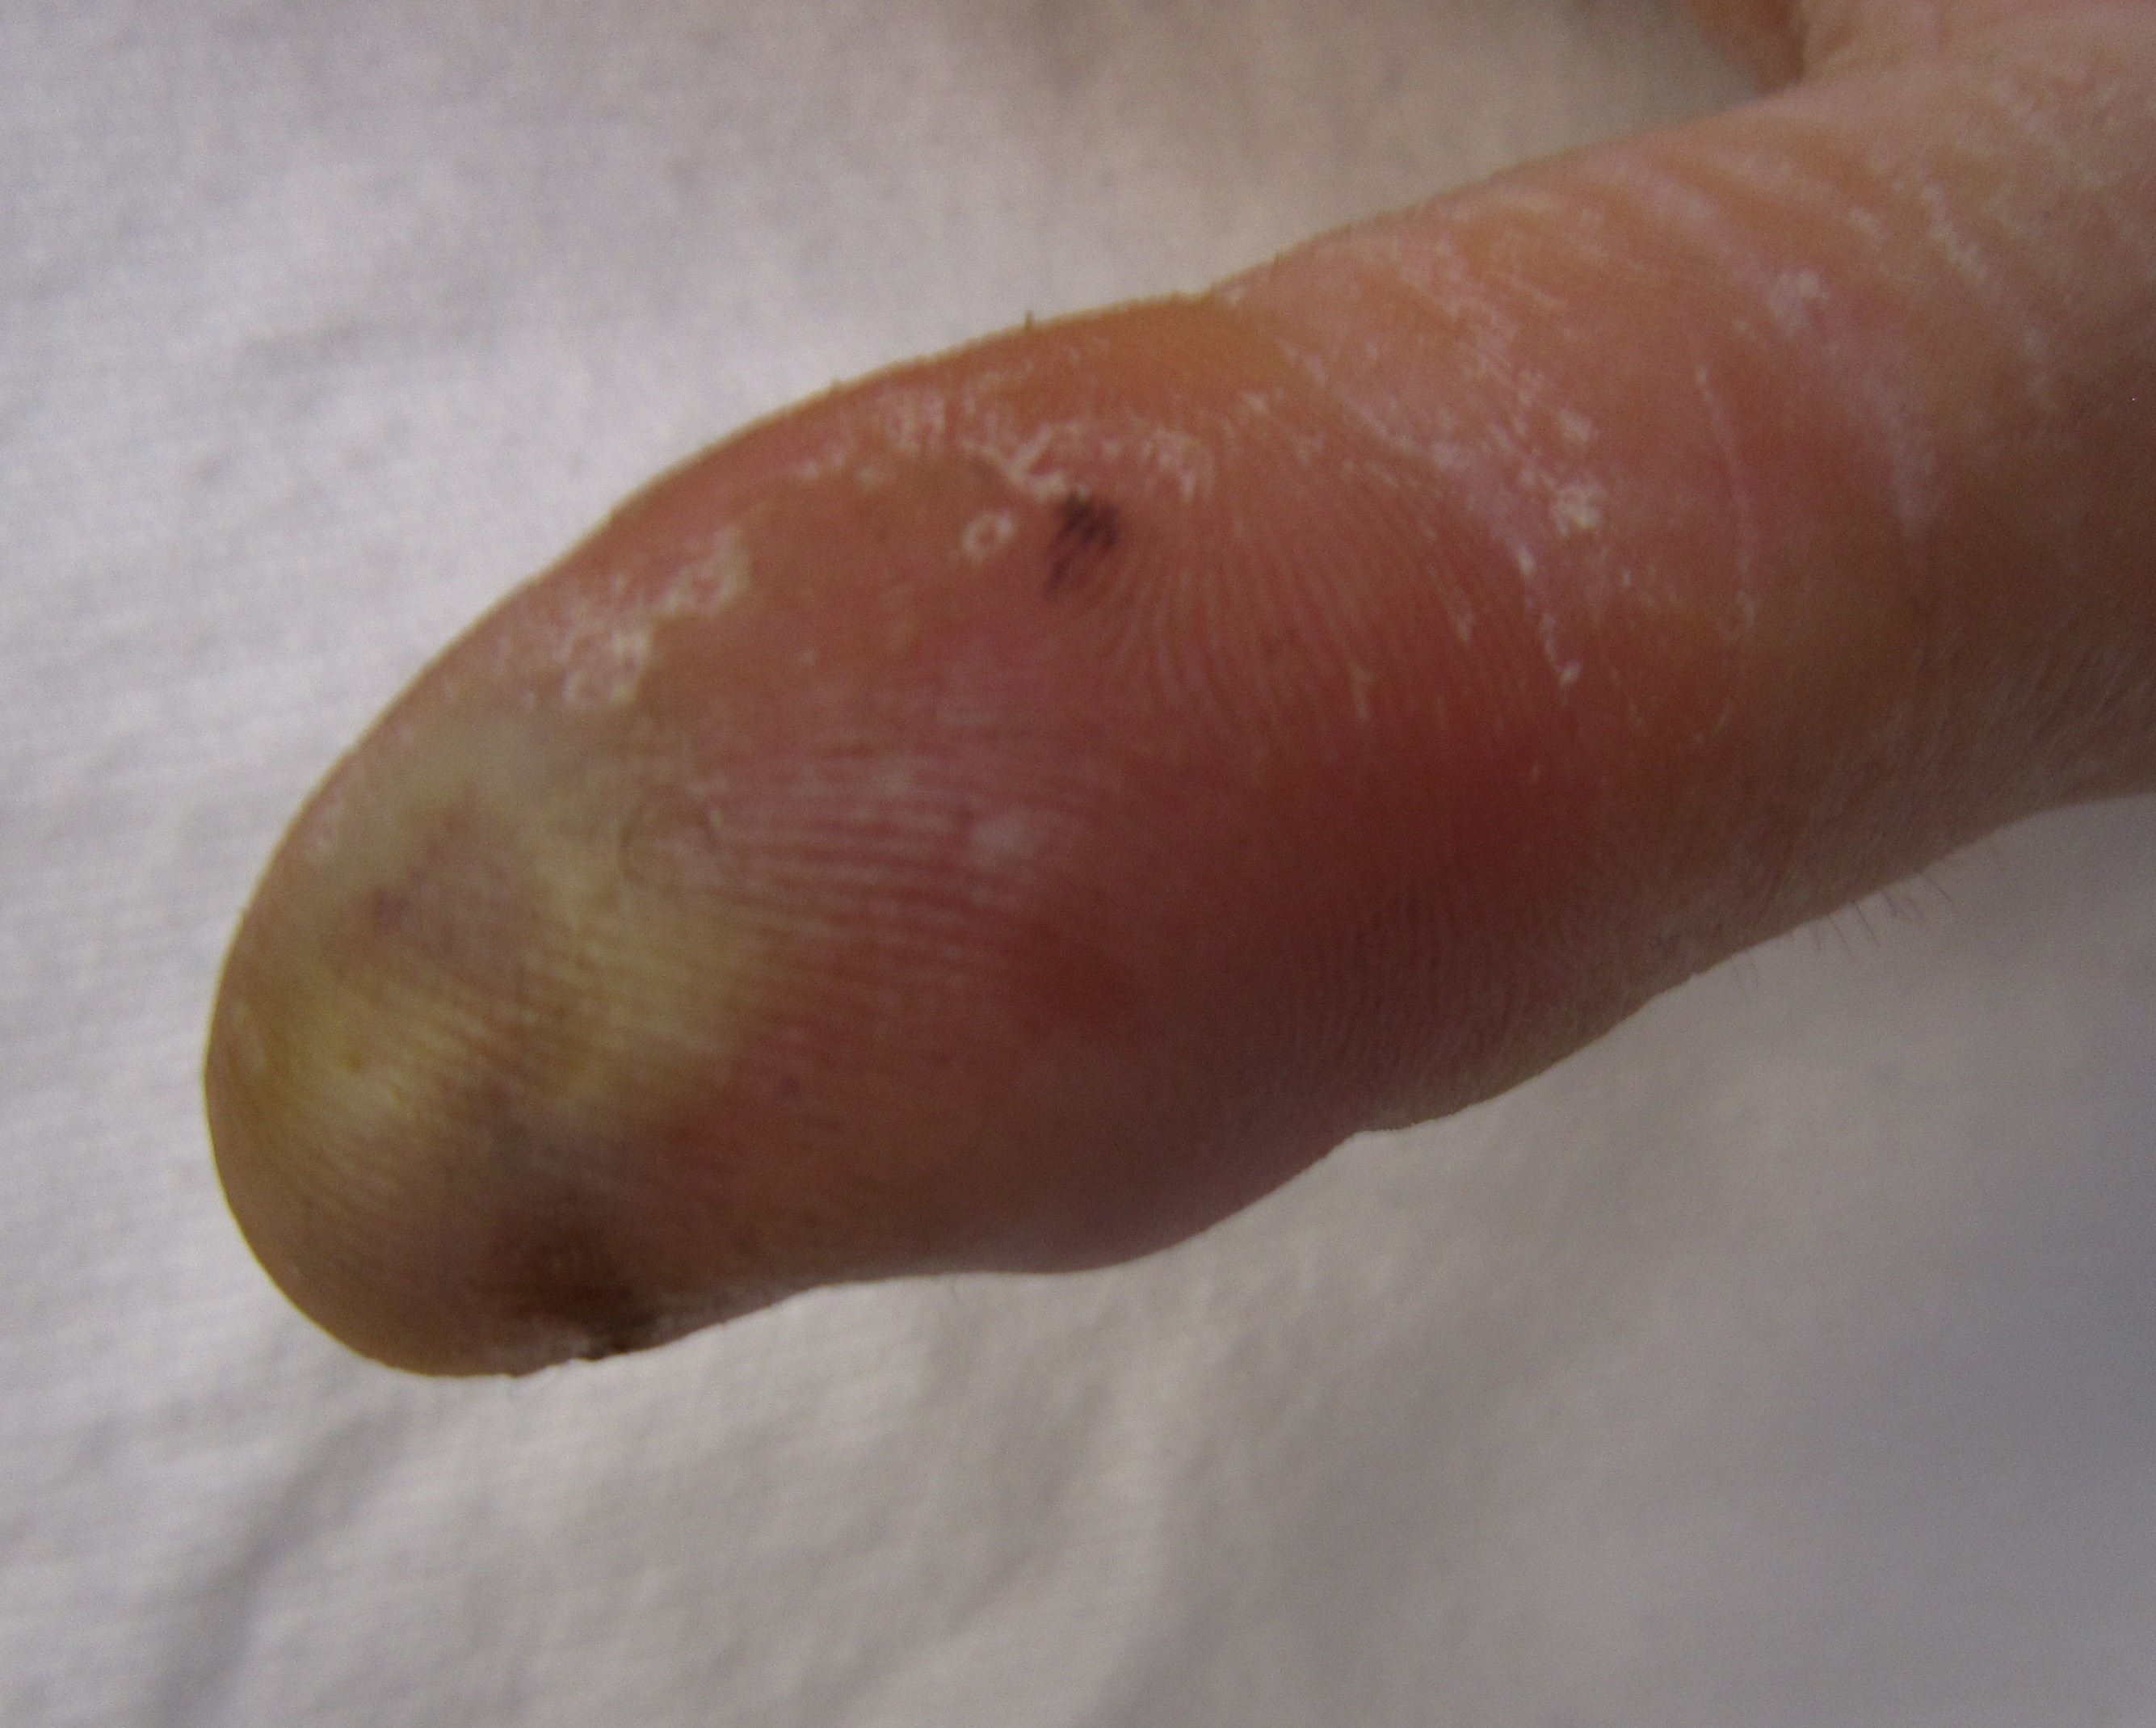 Herpetic Whitlow - Pictures, Symptoms, Causes and ...